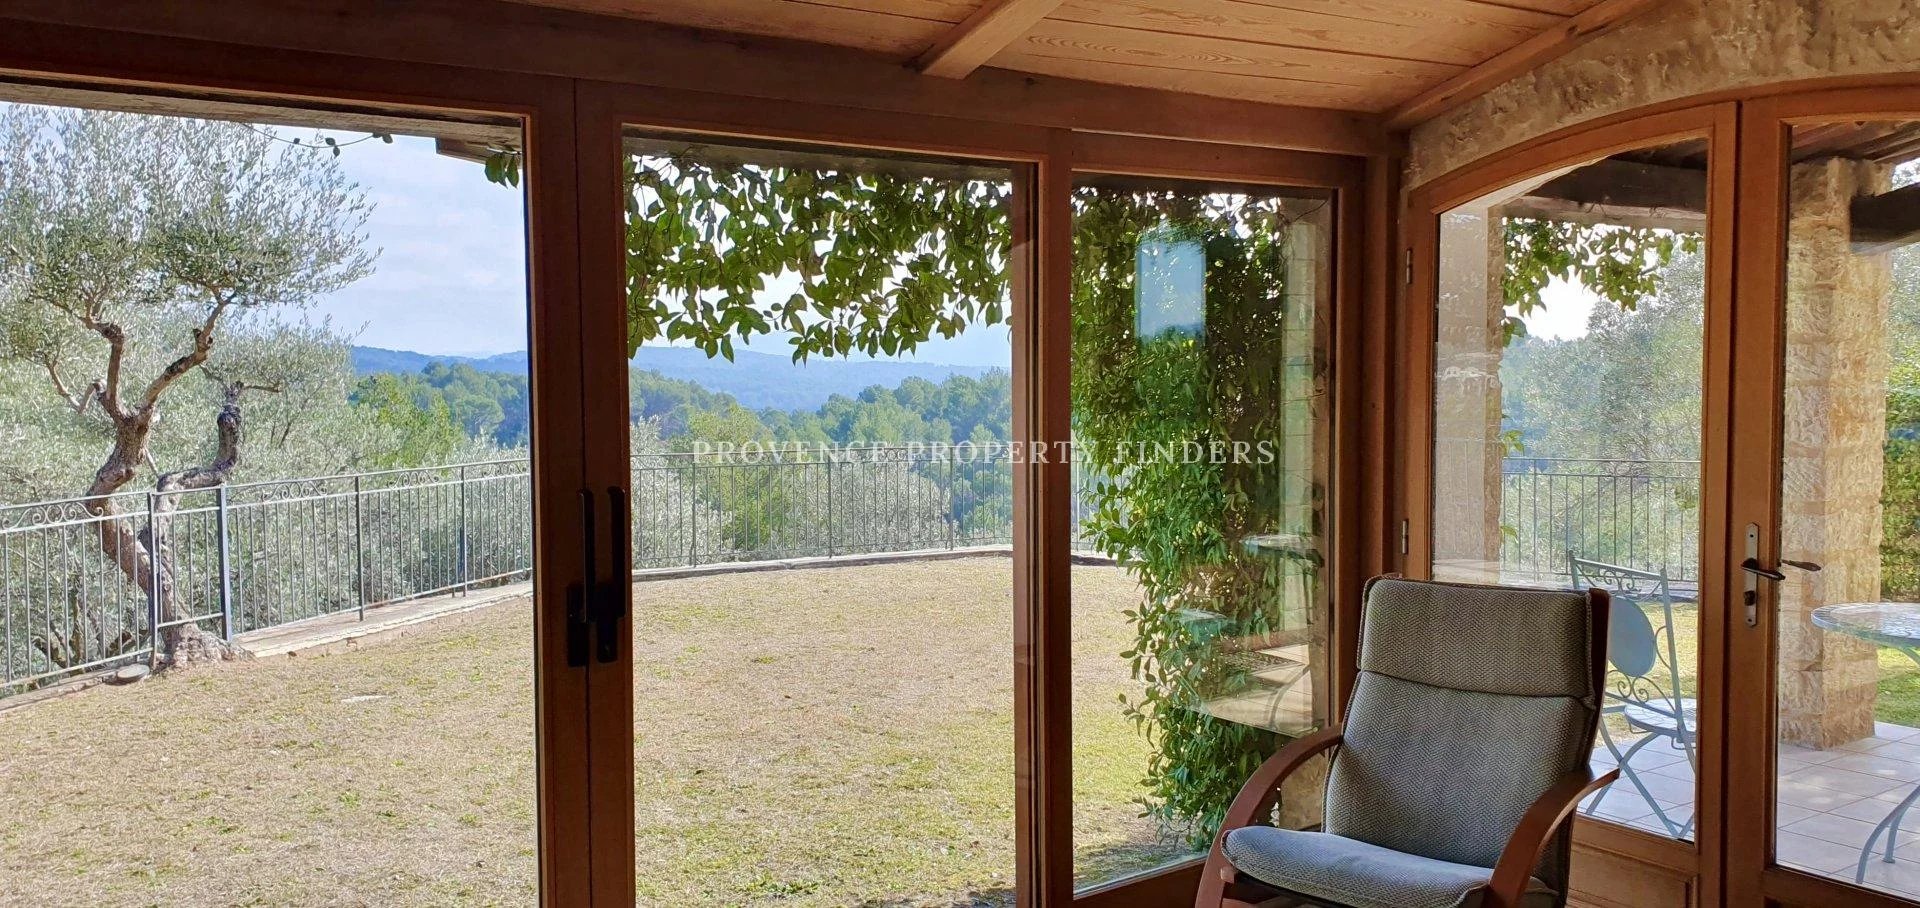 Exclusive. A wonderful property with a view, Callas.